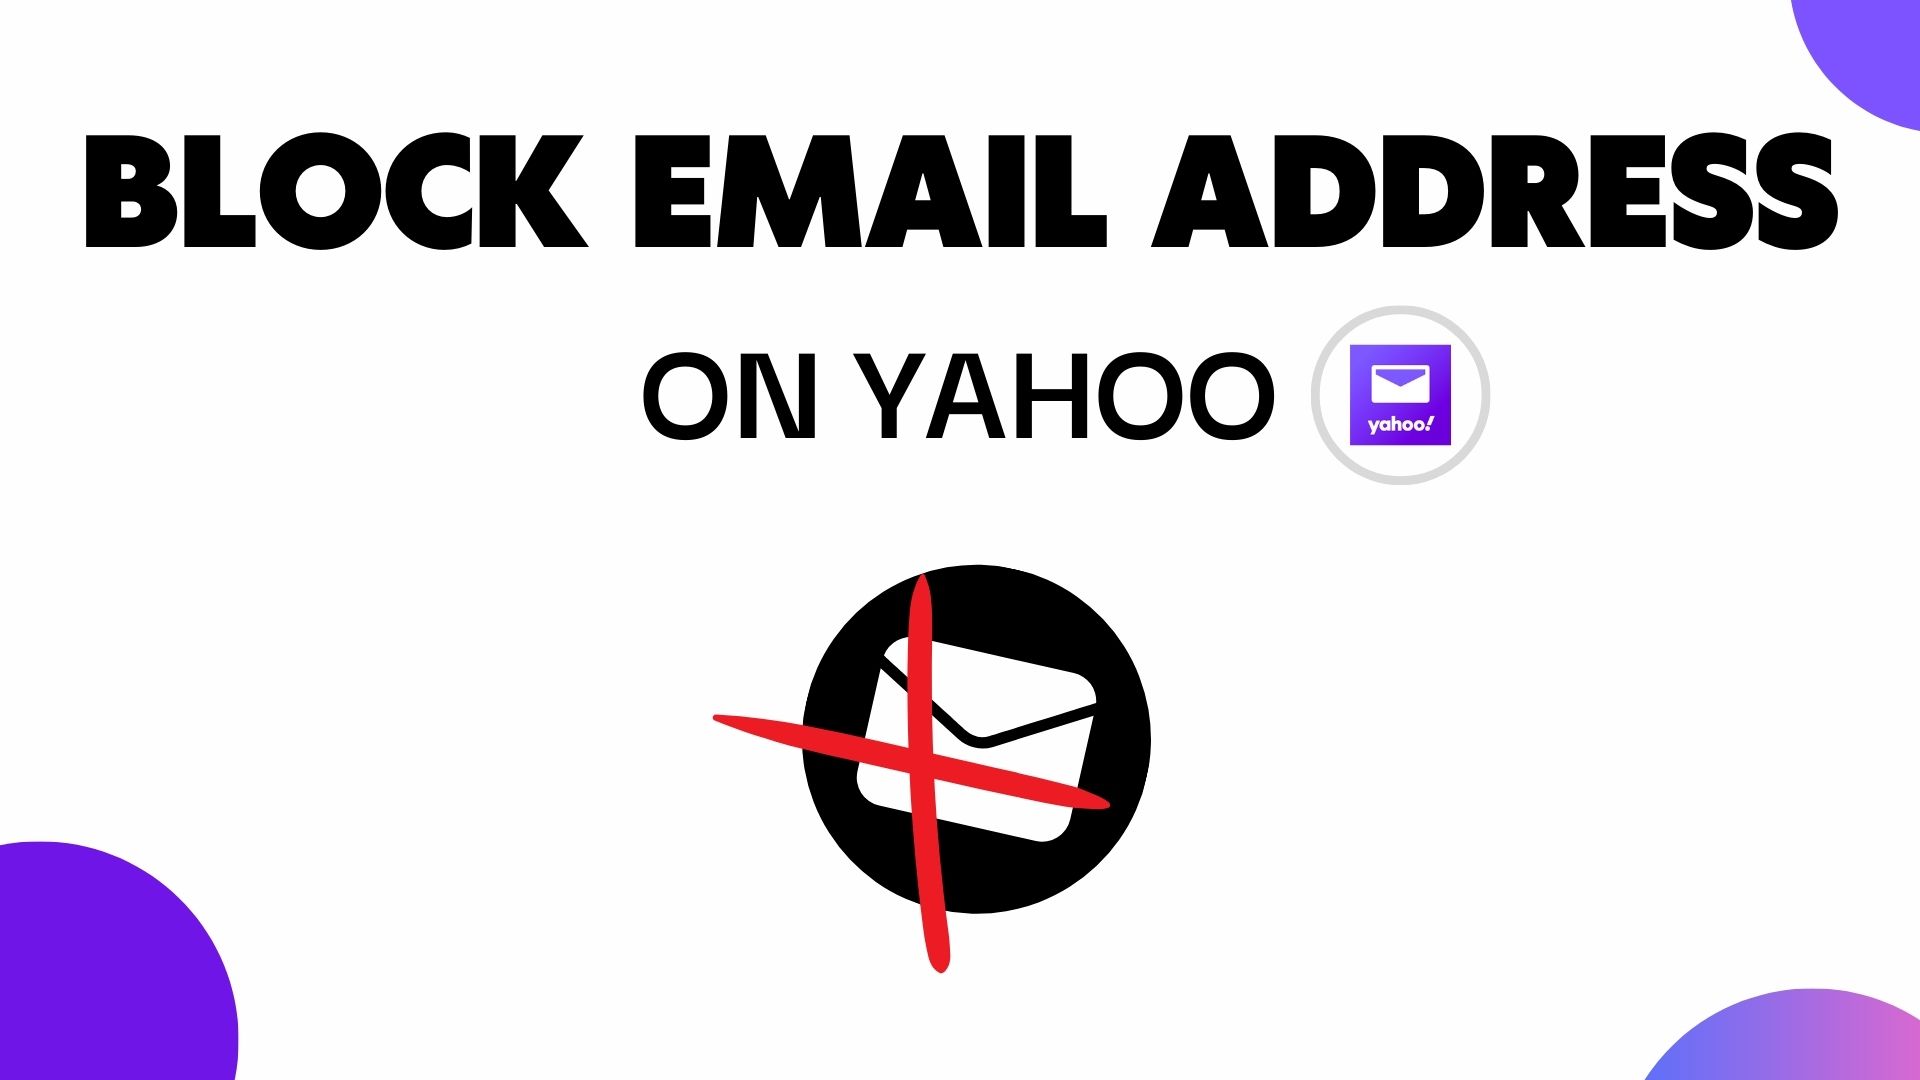 A Cleaner, Faster and More Powerful Yahoo Mail